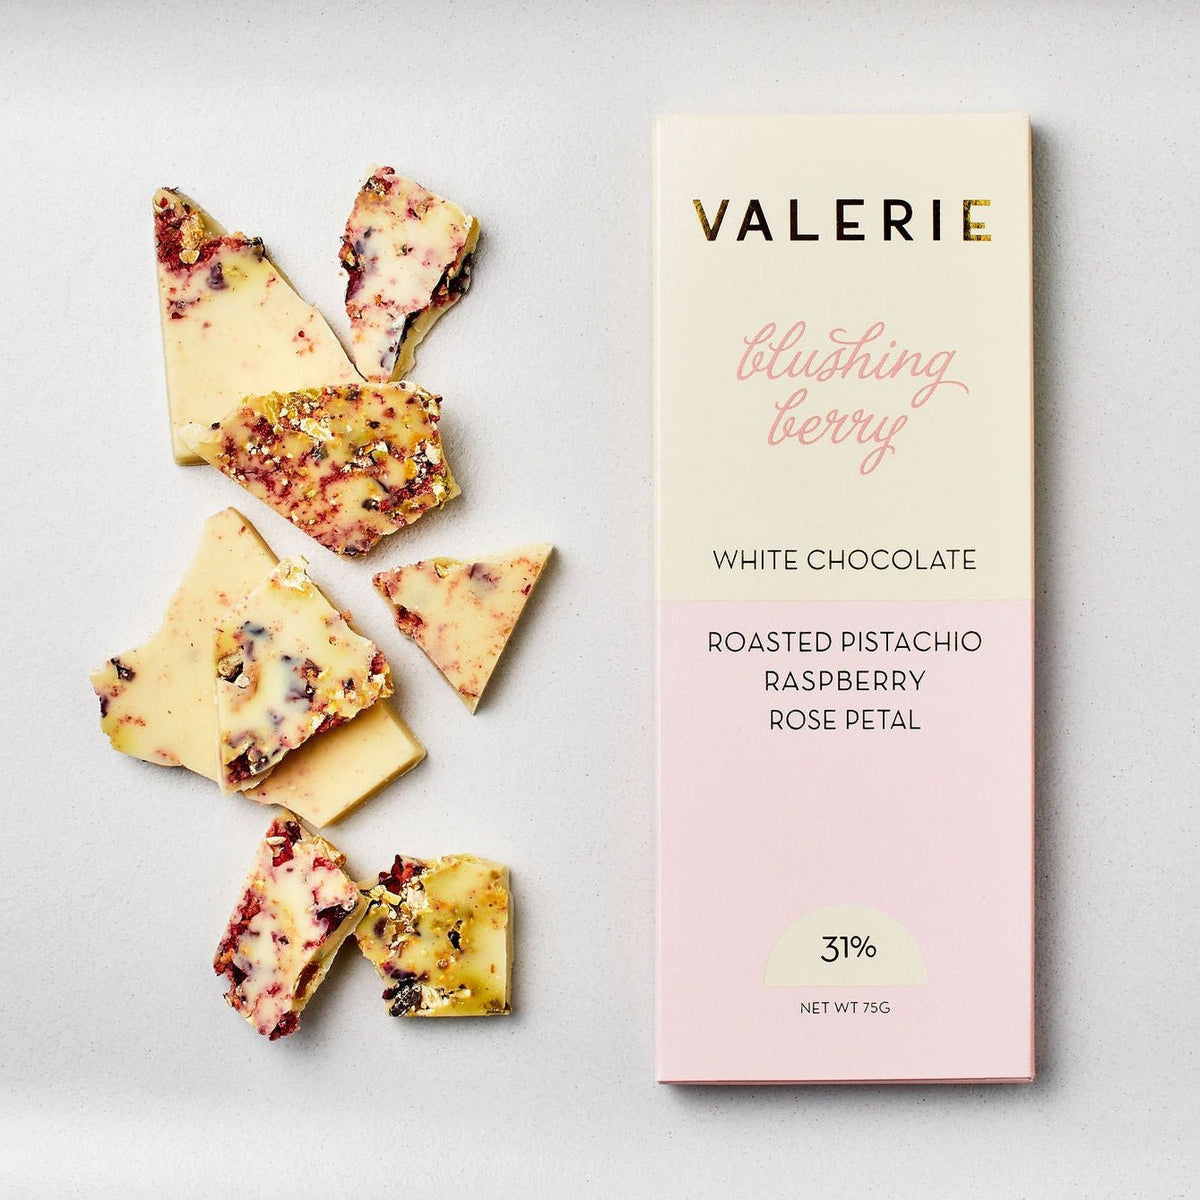 White chocolate with raspberry, pistachio, and rose petals beside product packaging labeled Valerie Blushing Berry Bar